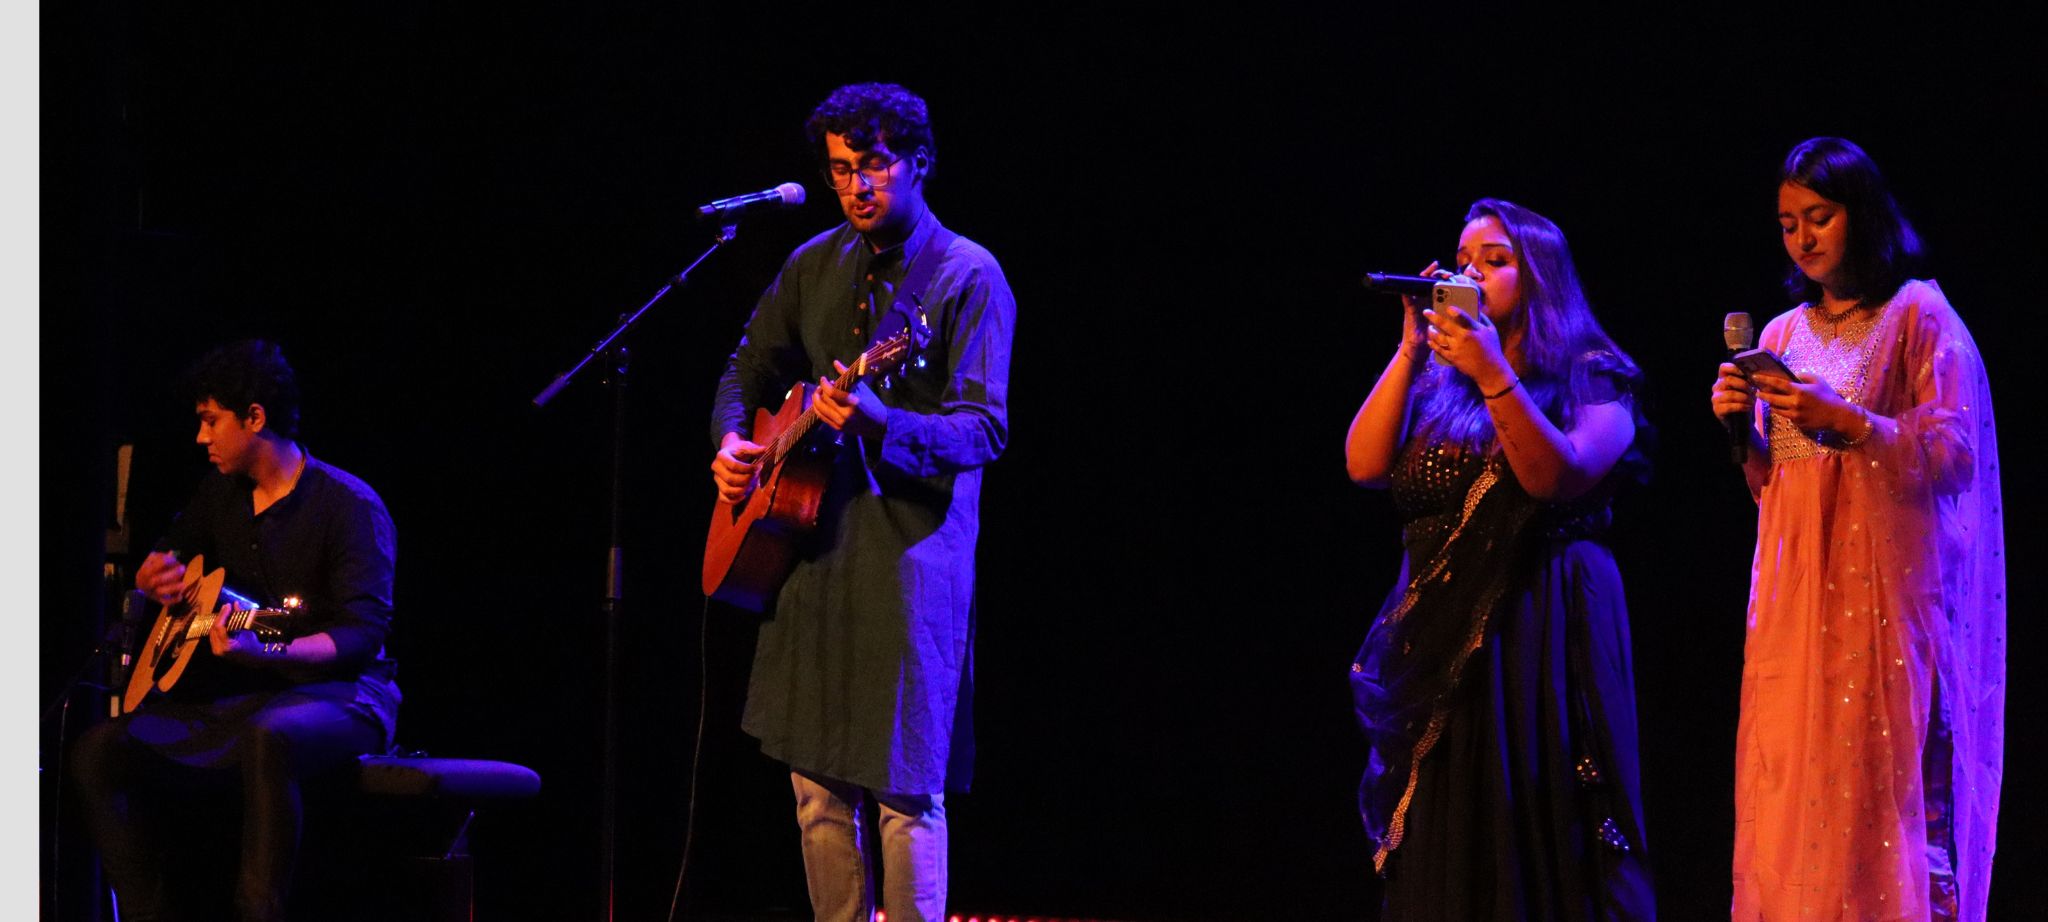 Indian students sing folk songs